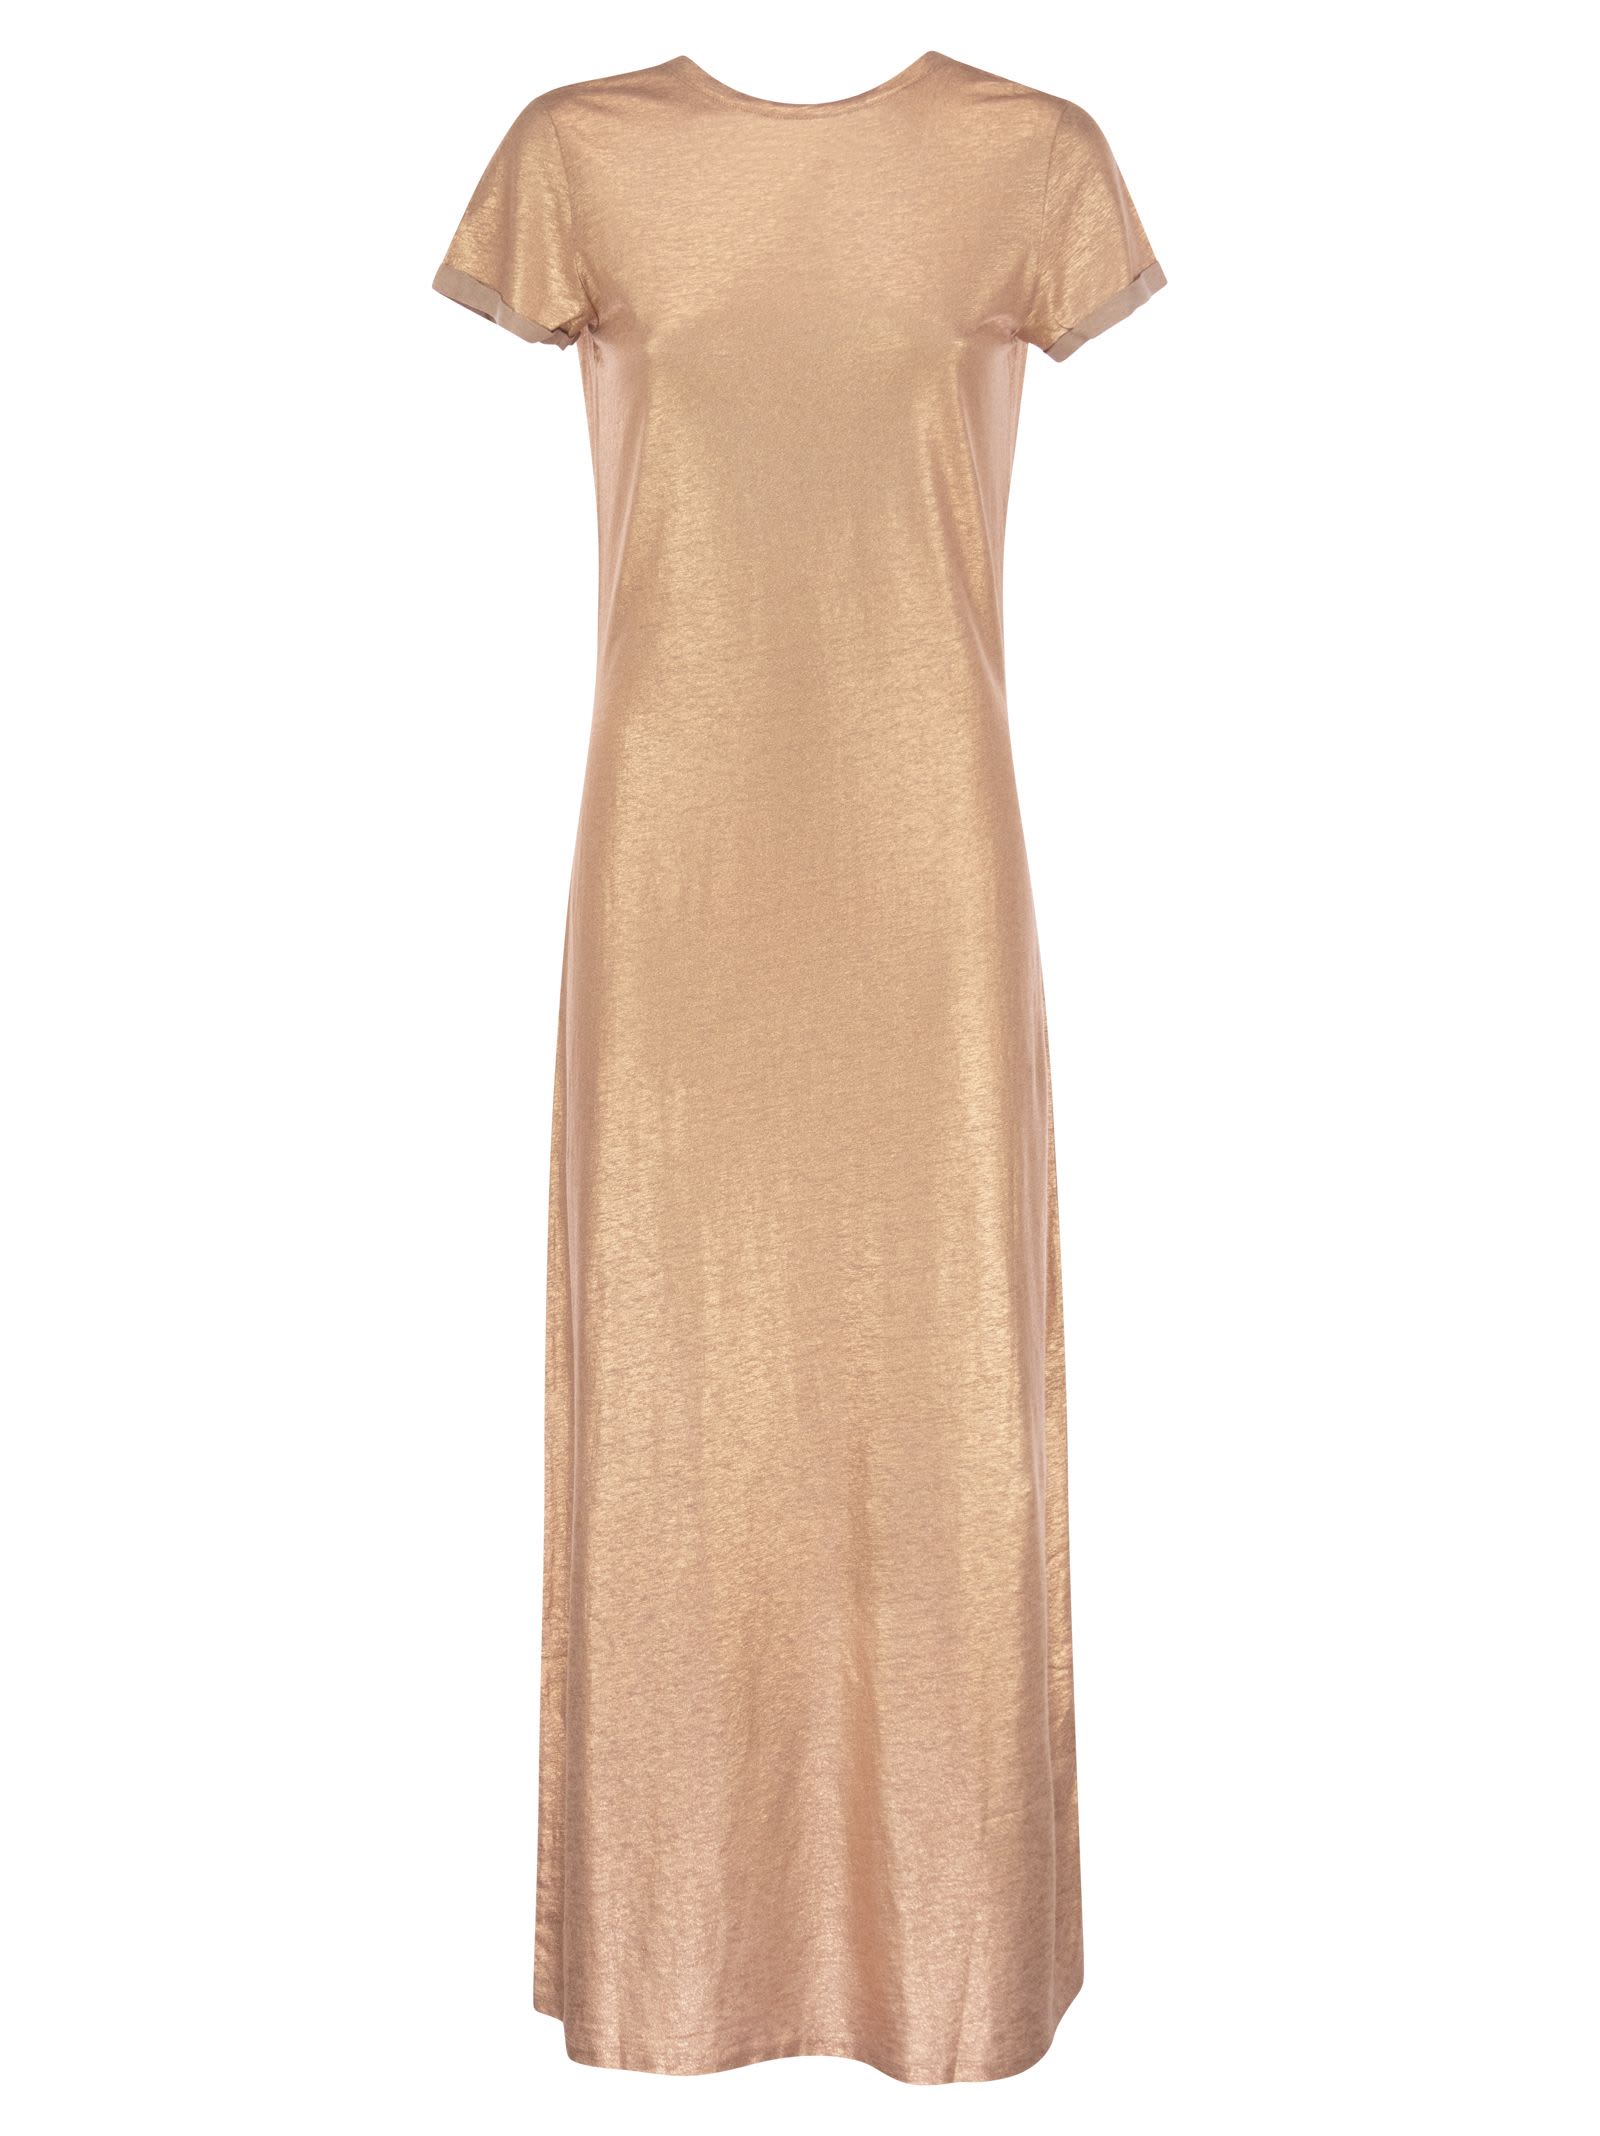 Shop Majestic Dress With Back Neckline In Pink